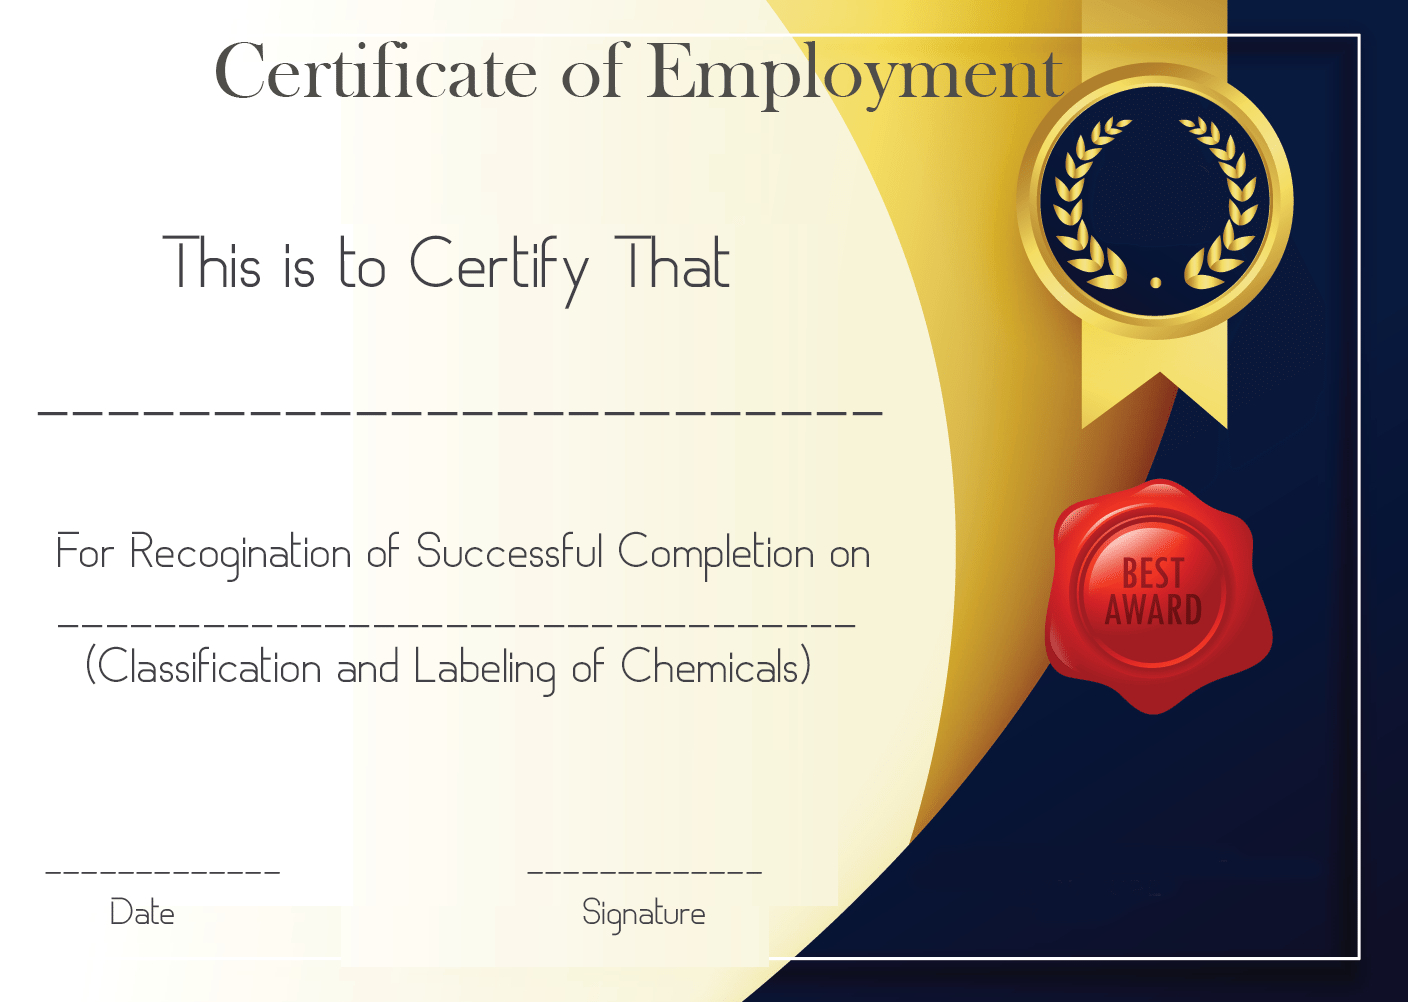 Free Sample Certificate Of Employment Template | Certificate Pertaining To Sample Certificate Employment Template